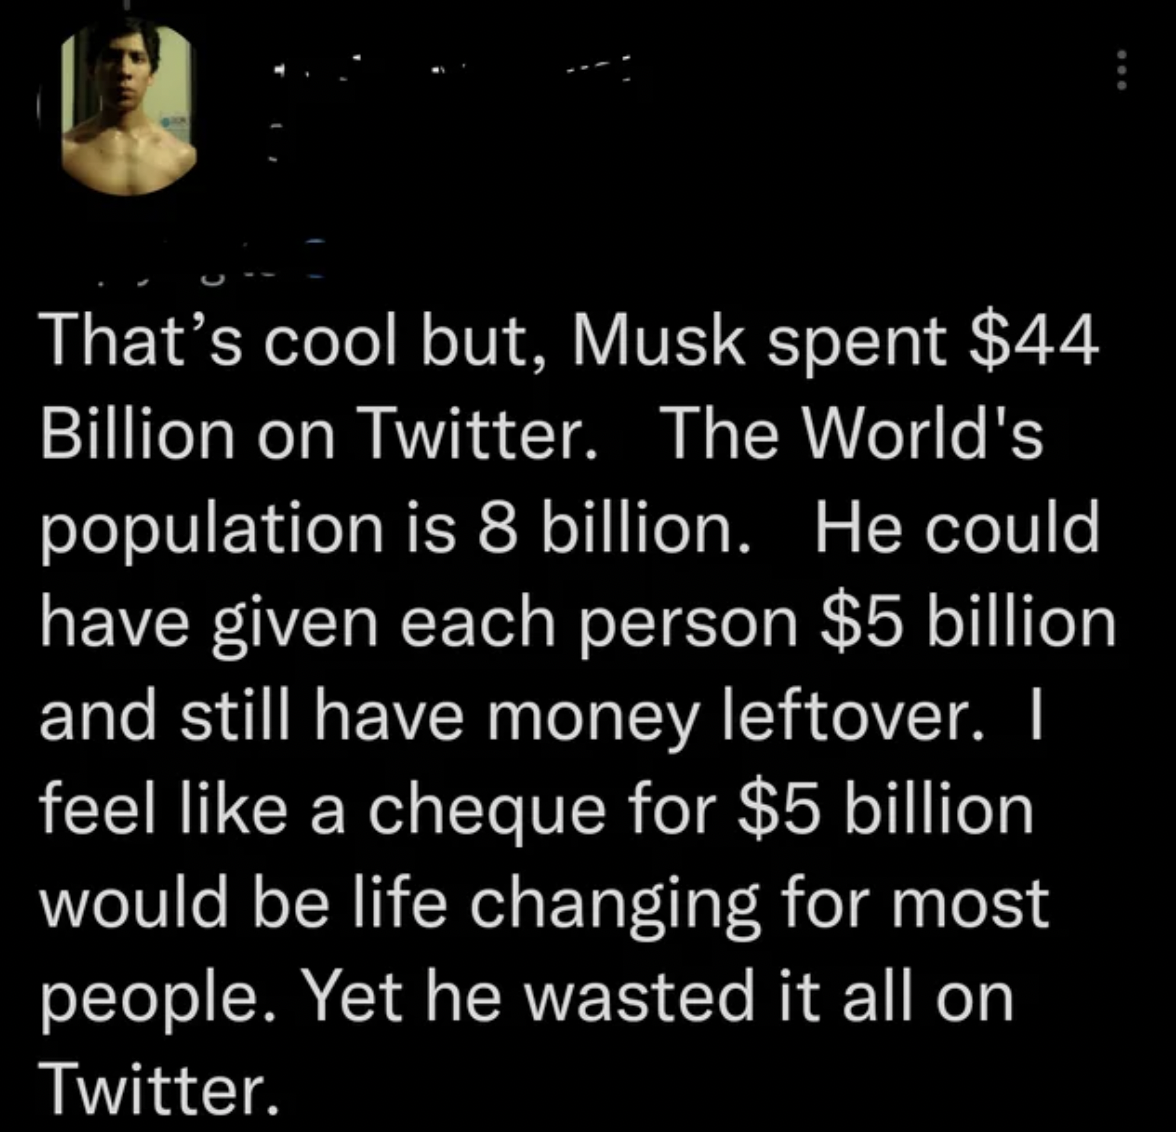 Facepalms - That's cool but, Musk spent $44 Billion on Twitter. The World's population is 8 billion. He could have given each person $5 billion and still have money leftover. I feel a cheque for $5 billion would be life changing for most people. Yet he wa